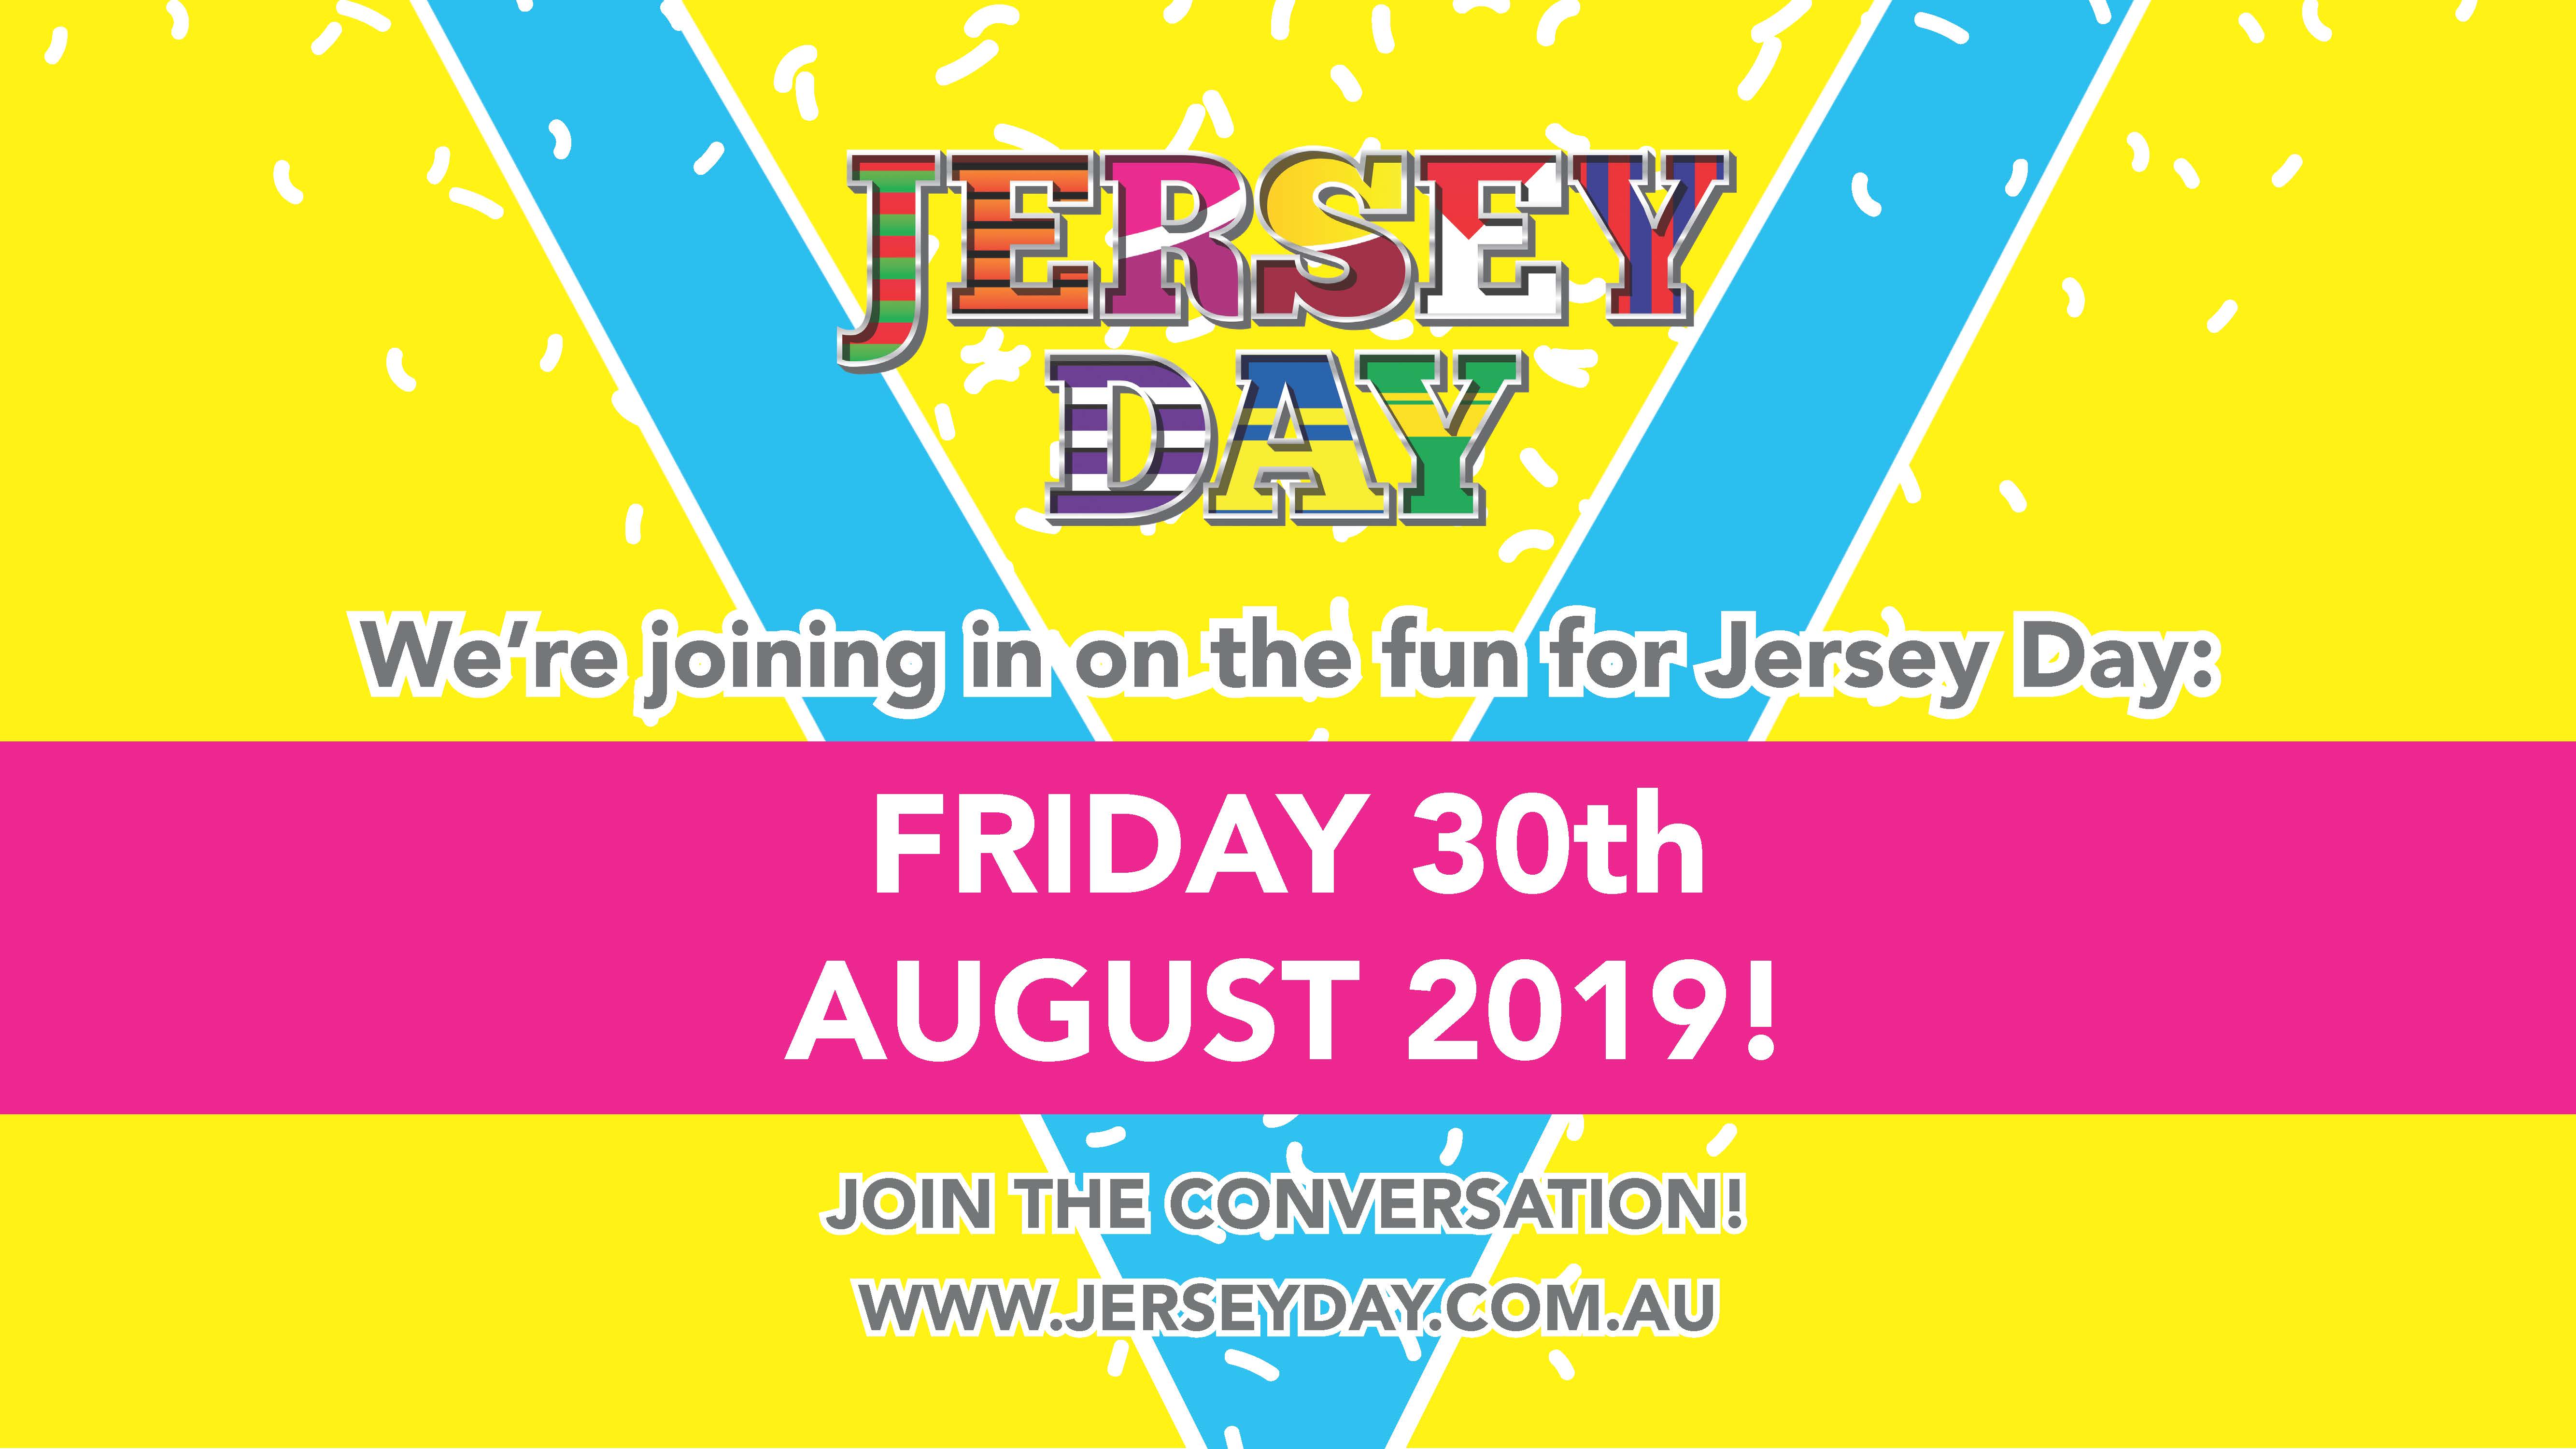 Athletes Support Jersey Day 2019 